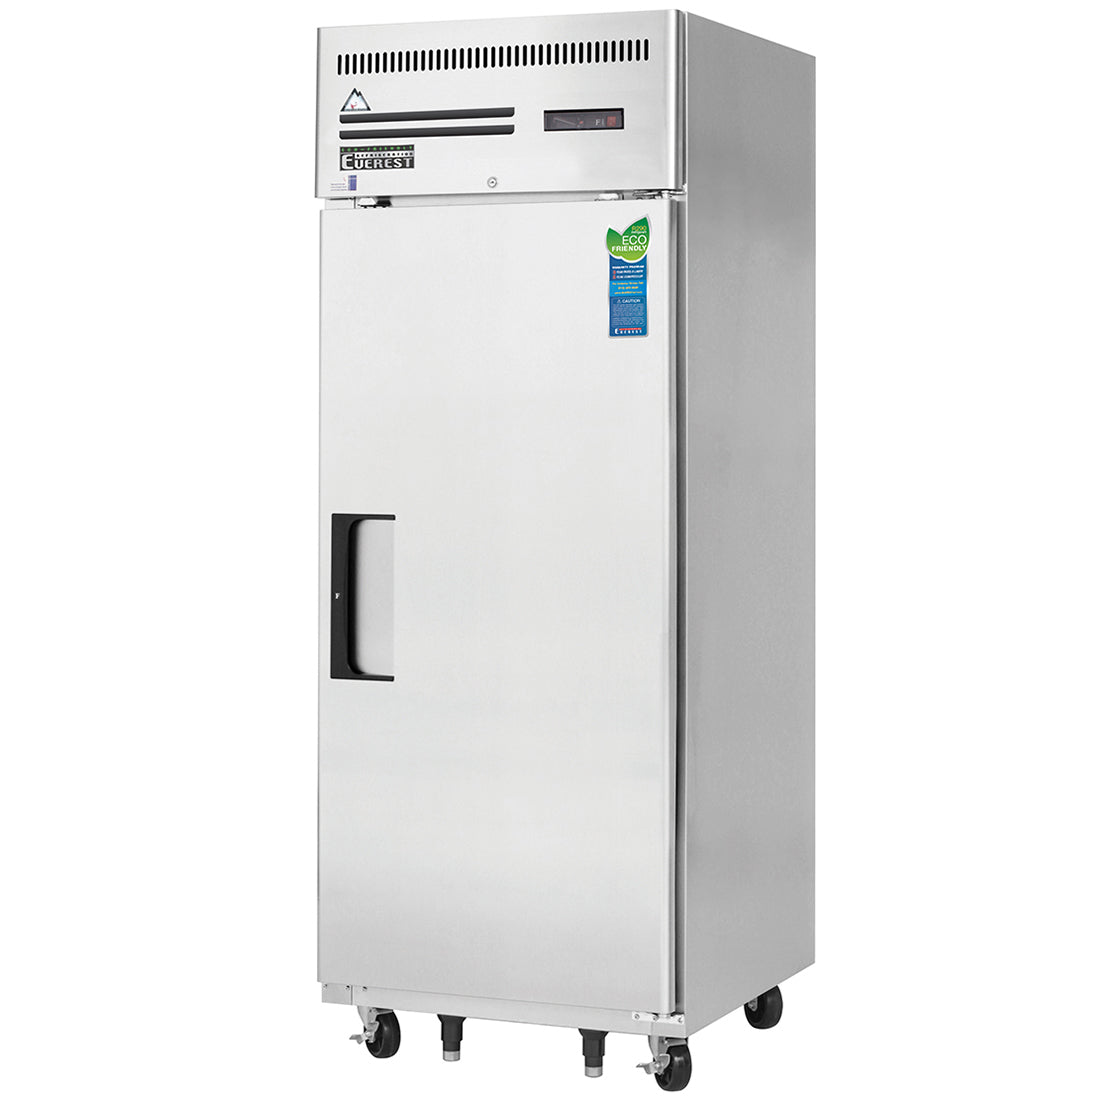 Everest ES Series-ESF1 One Section Solid Door Upright Reach-In Freezer - 23 Cu. Ft.